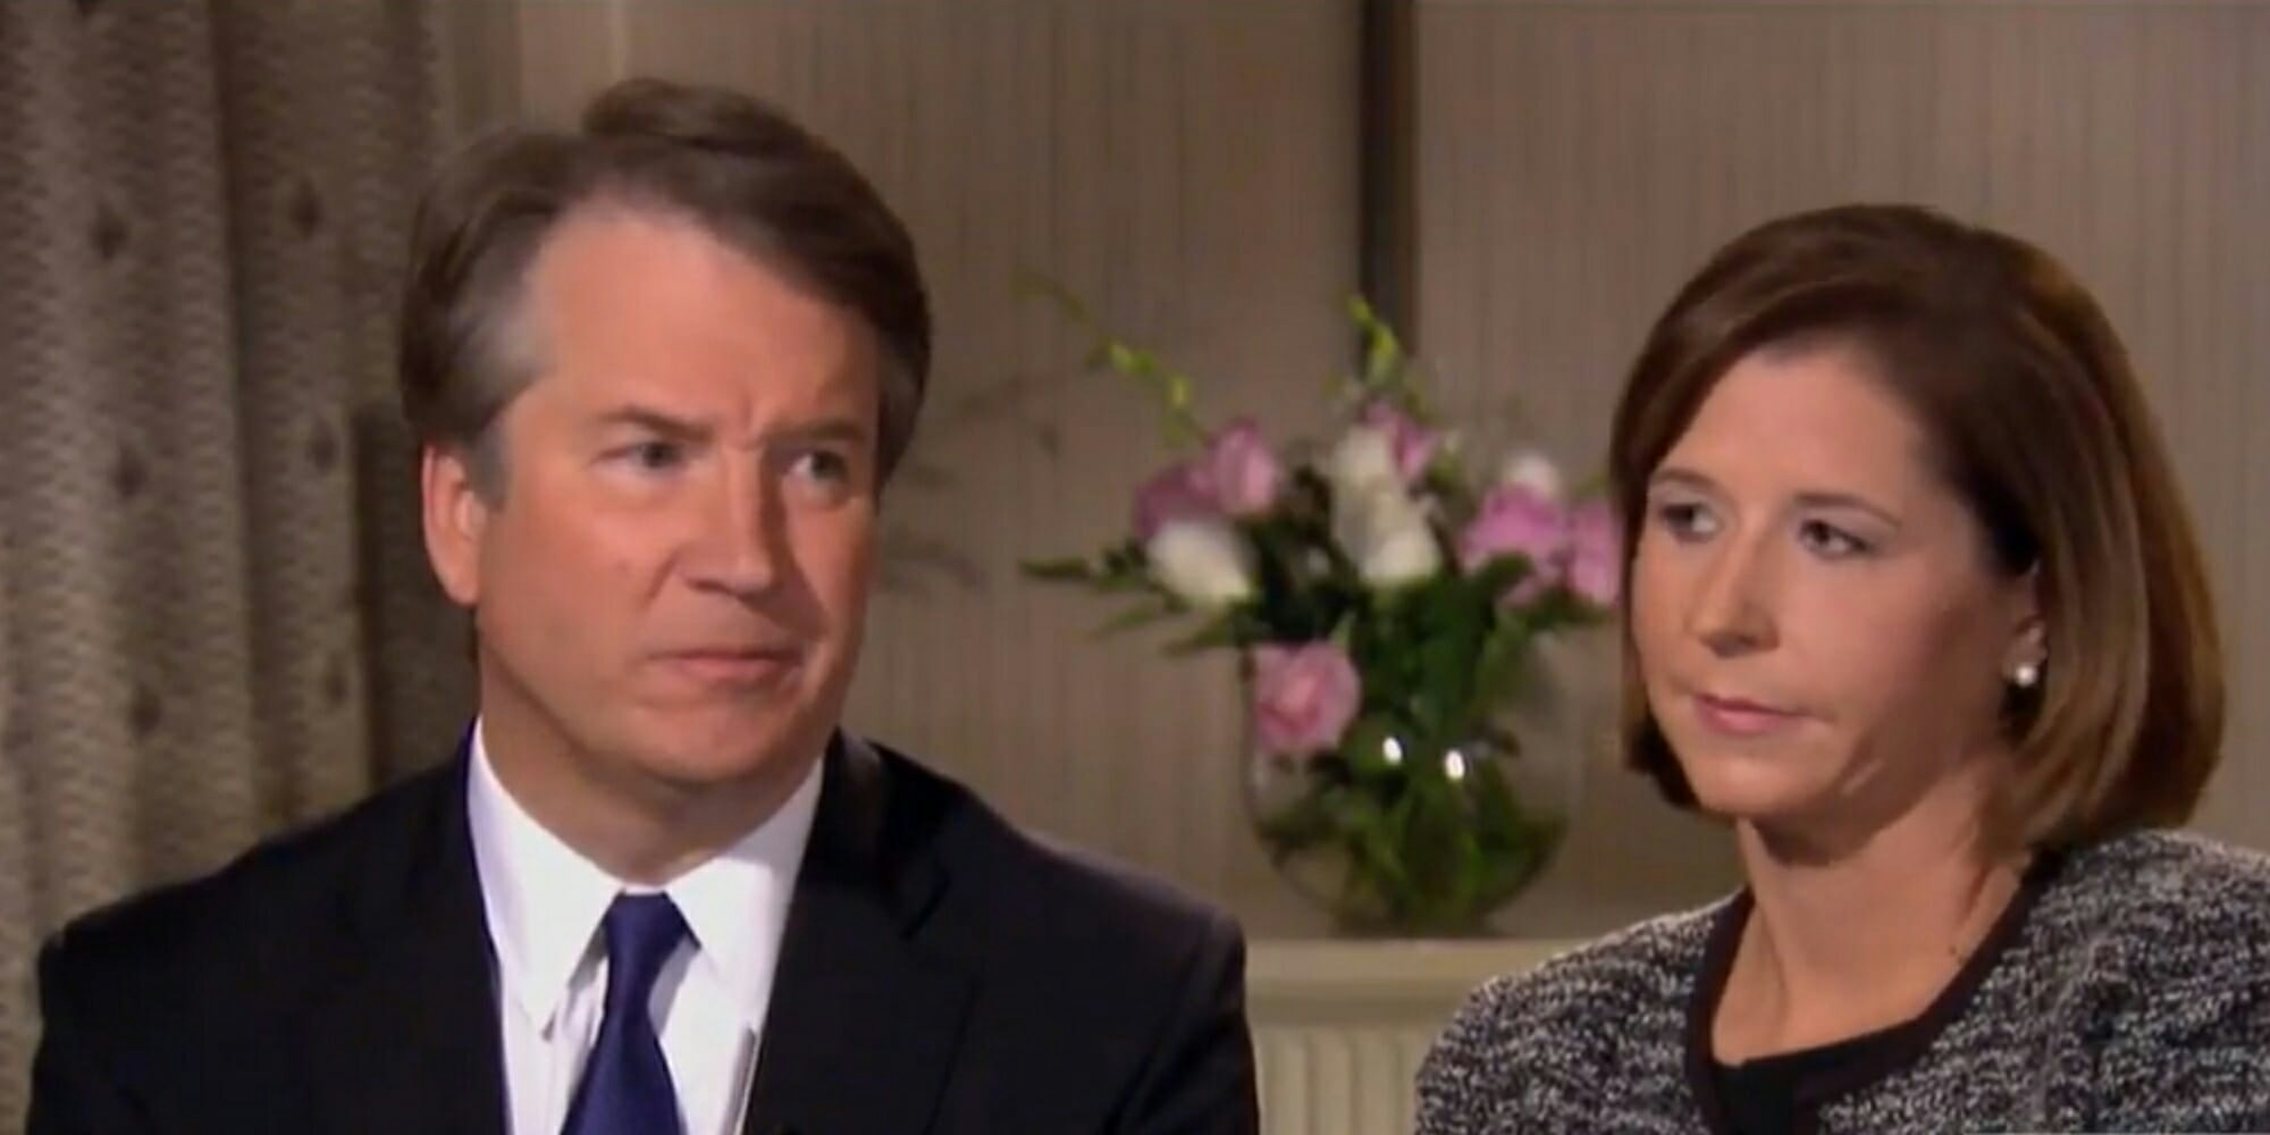 Brett Kavanaugh is under intense scrutiny for interrupting his wife amid sexual assault accusations.